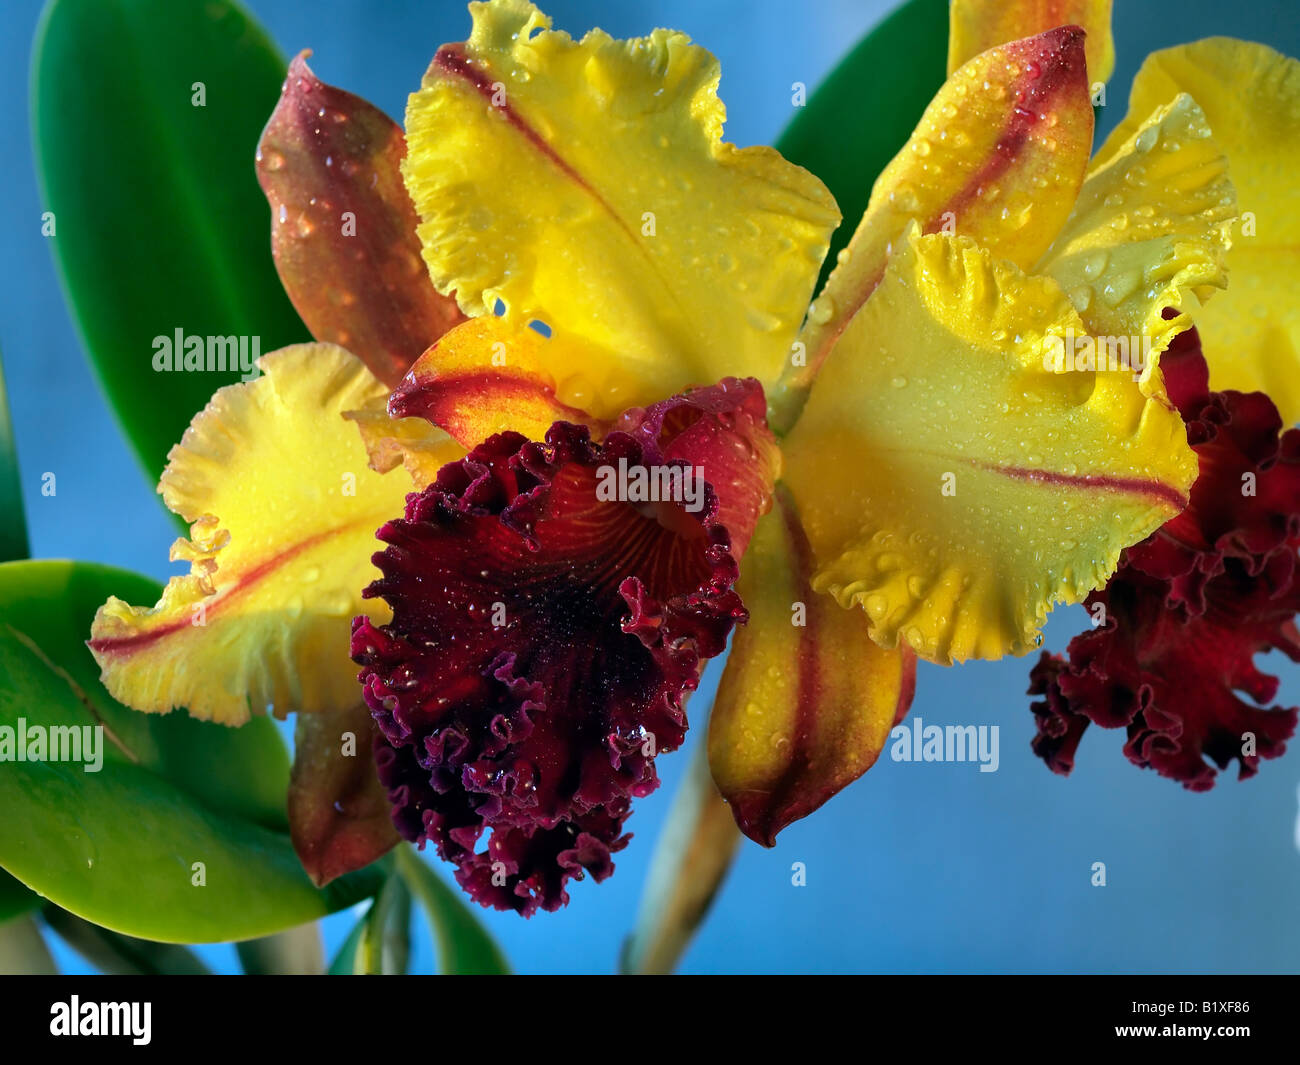 Cattleya orchid in an arrangement in front of backdrop Stock Photo